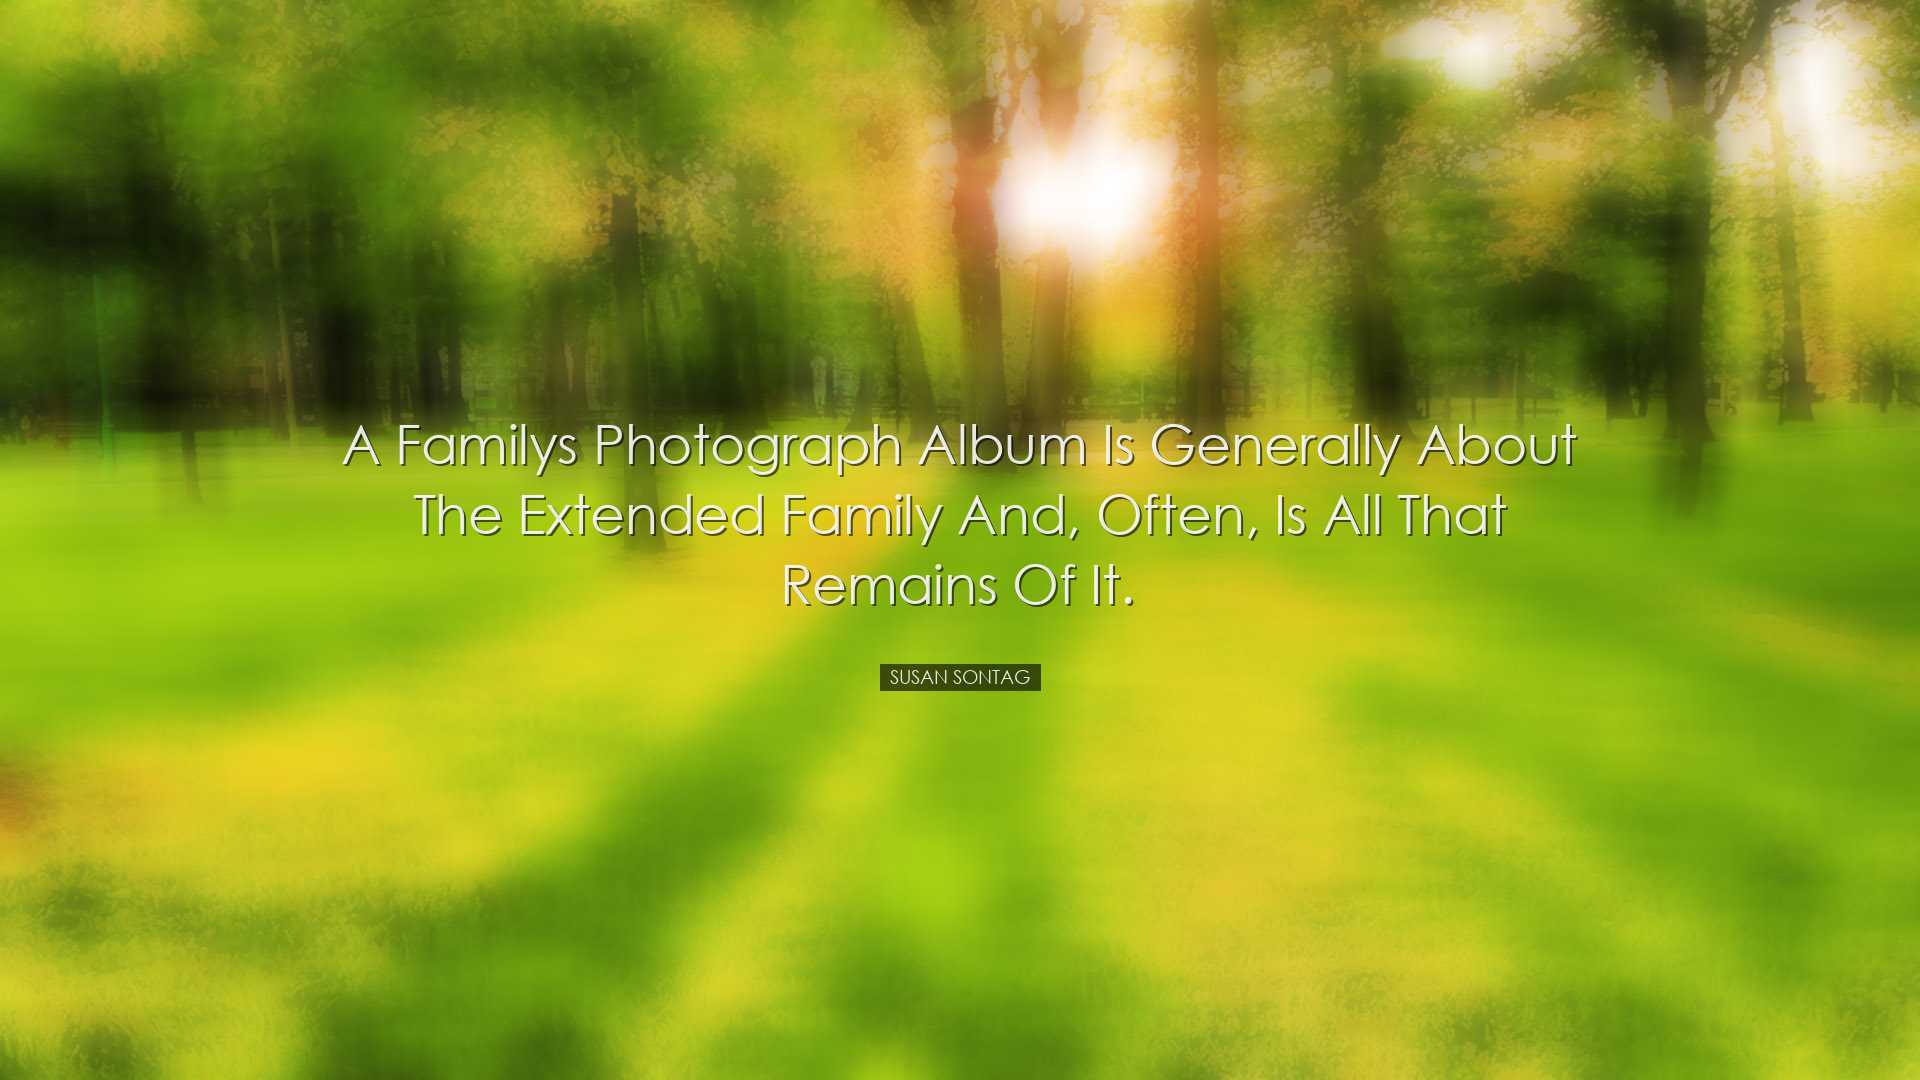 A familys photograph album is generally about the extended family